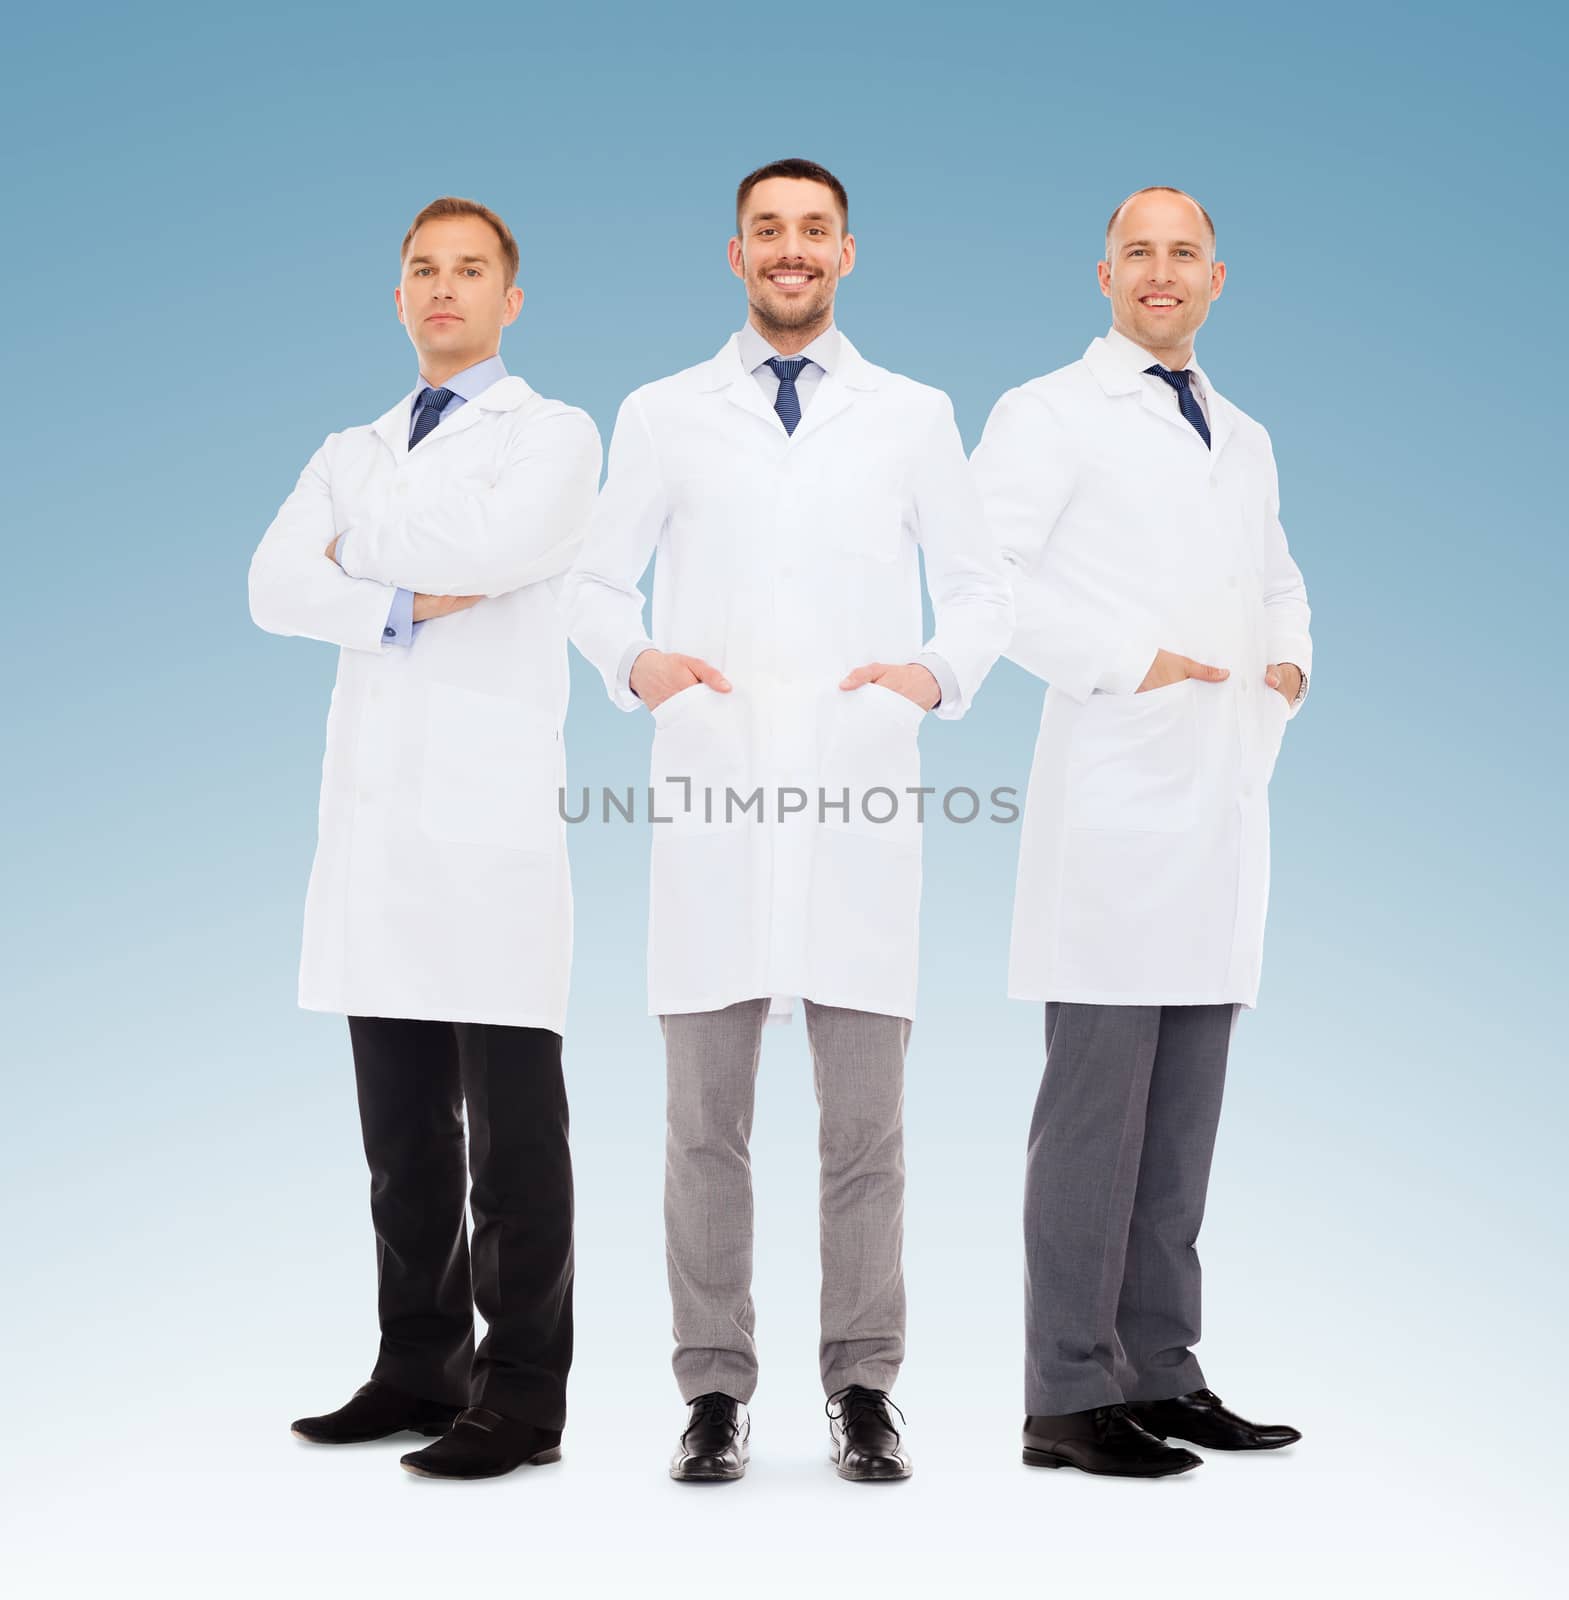 healthcare, profession, teamwork and medicine concept - group of smiling male doctors in white coats over blue background